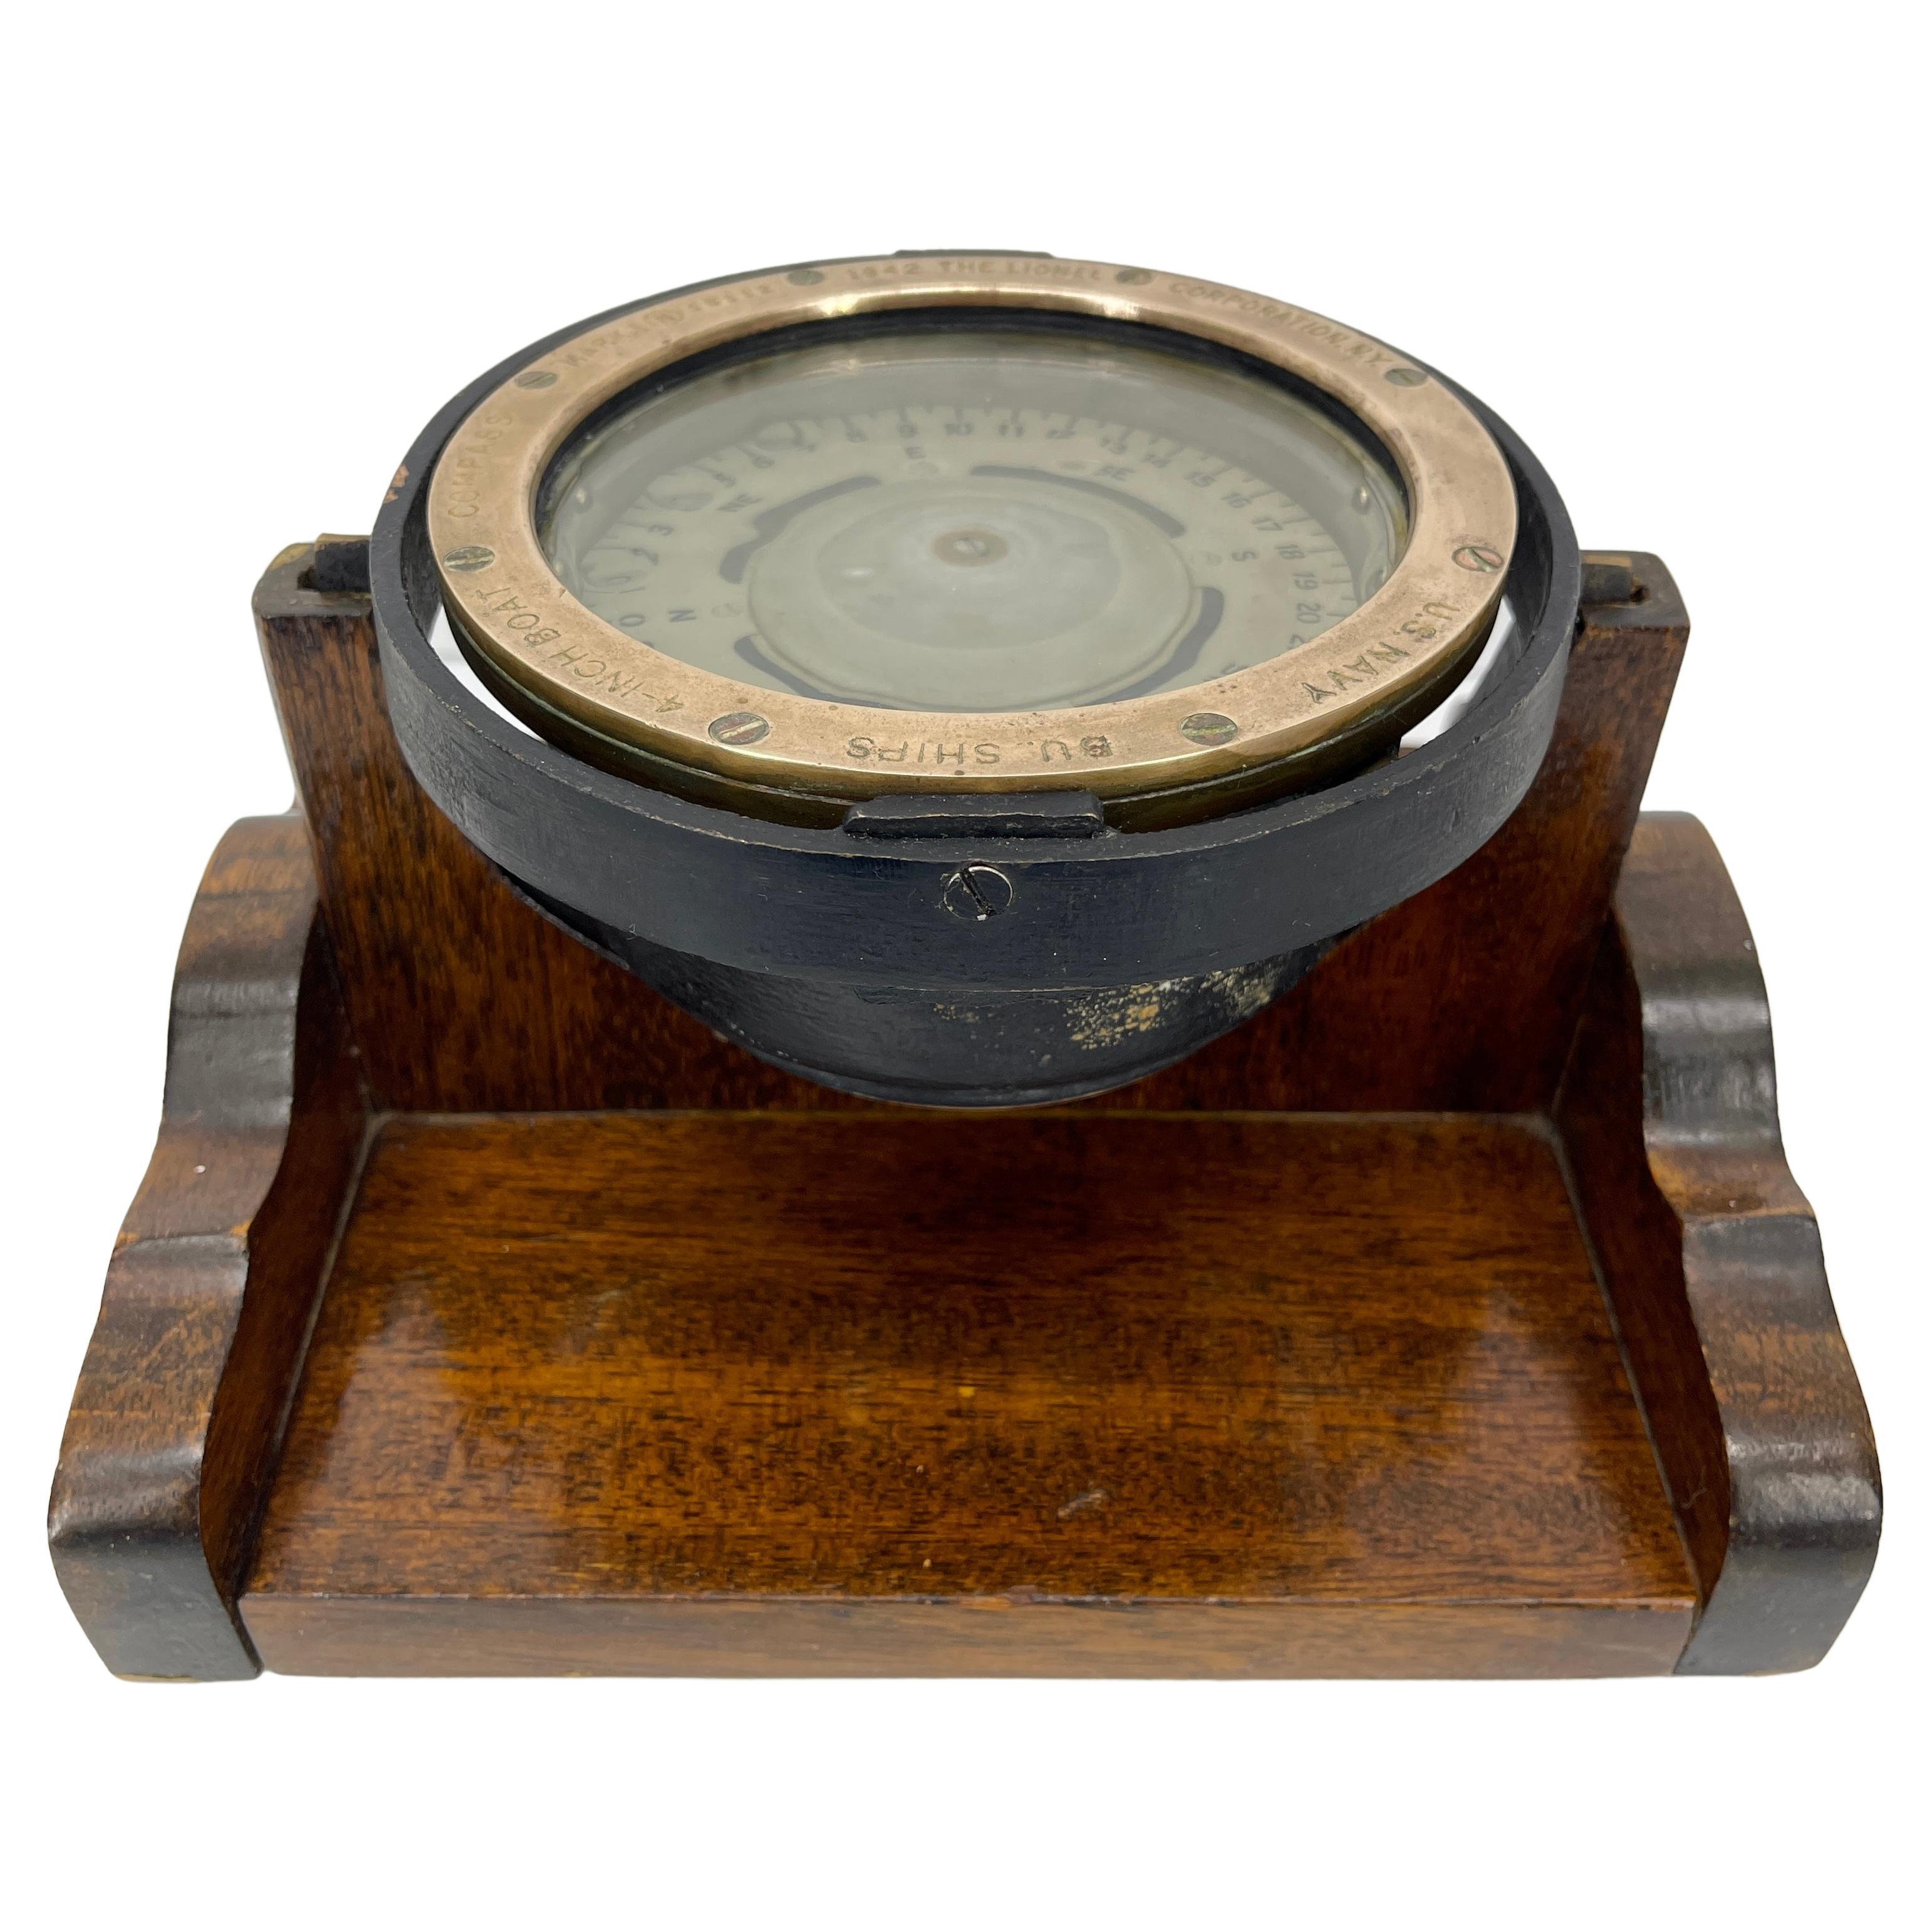 This large United States Navy Bureau of Ships compass is a Mark I 1942 issue.
The compass is in brass and on an oak stand so it can be a desk or shelf accessory.
The top brass disk is engraved with 